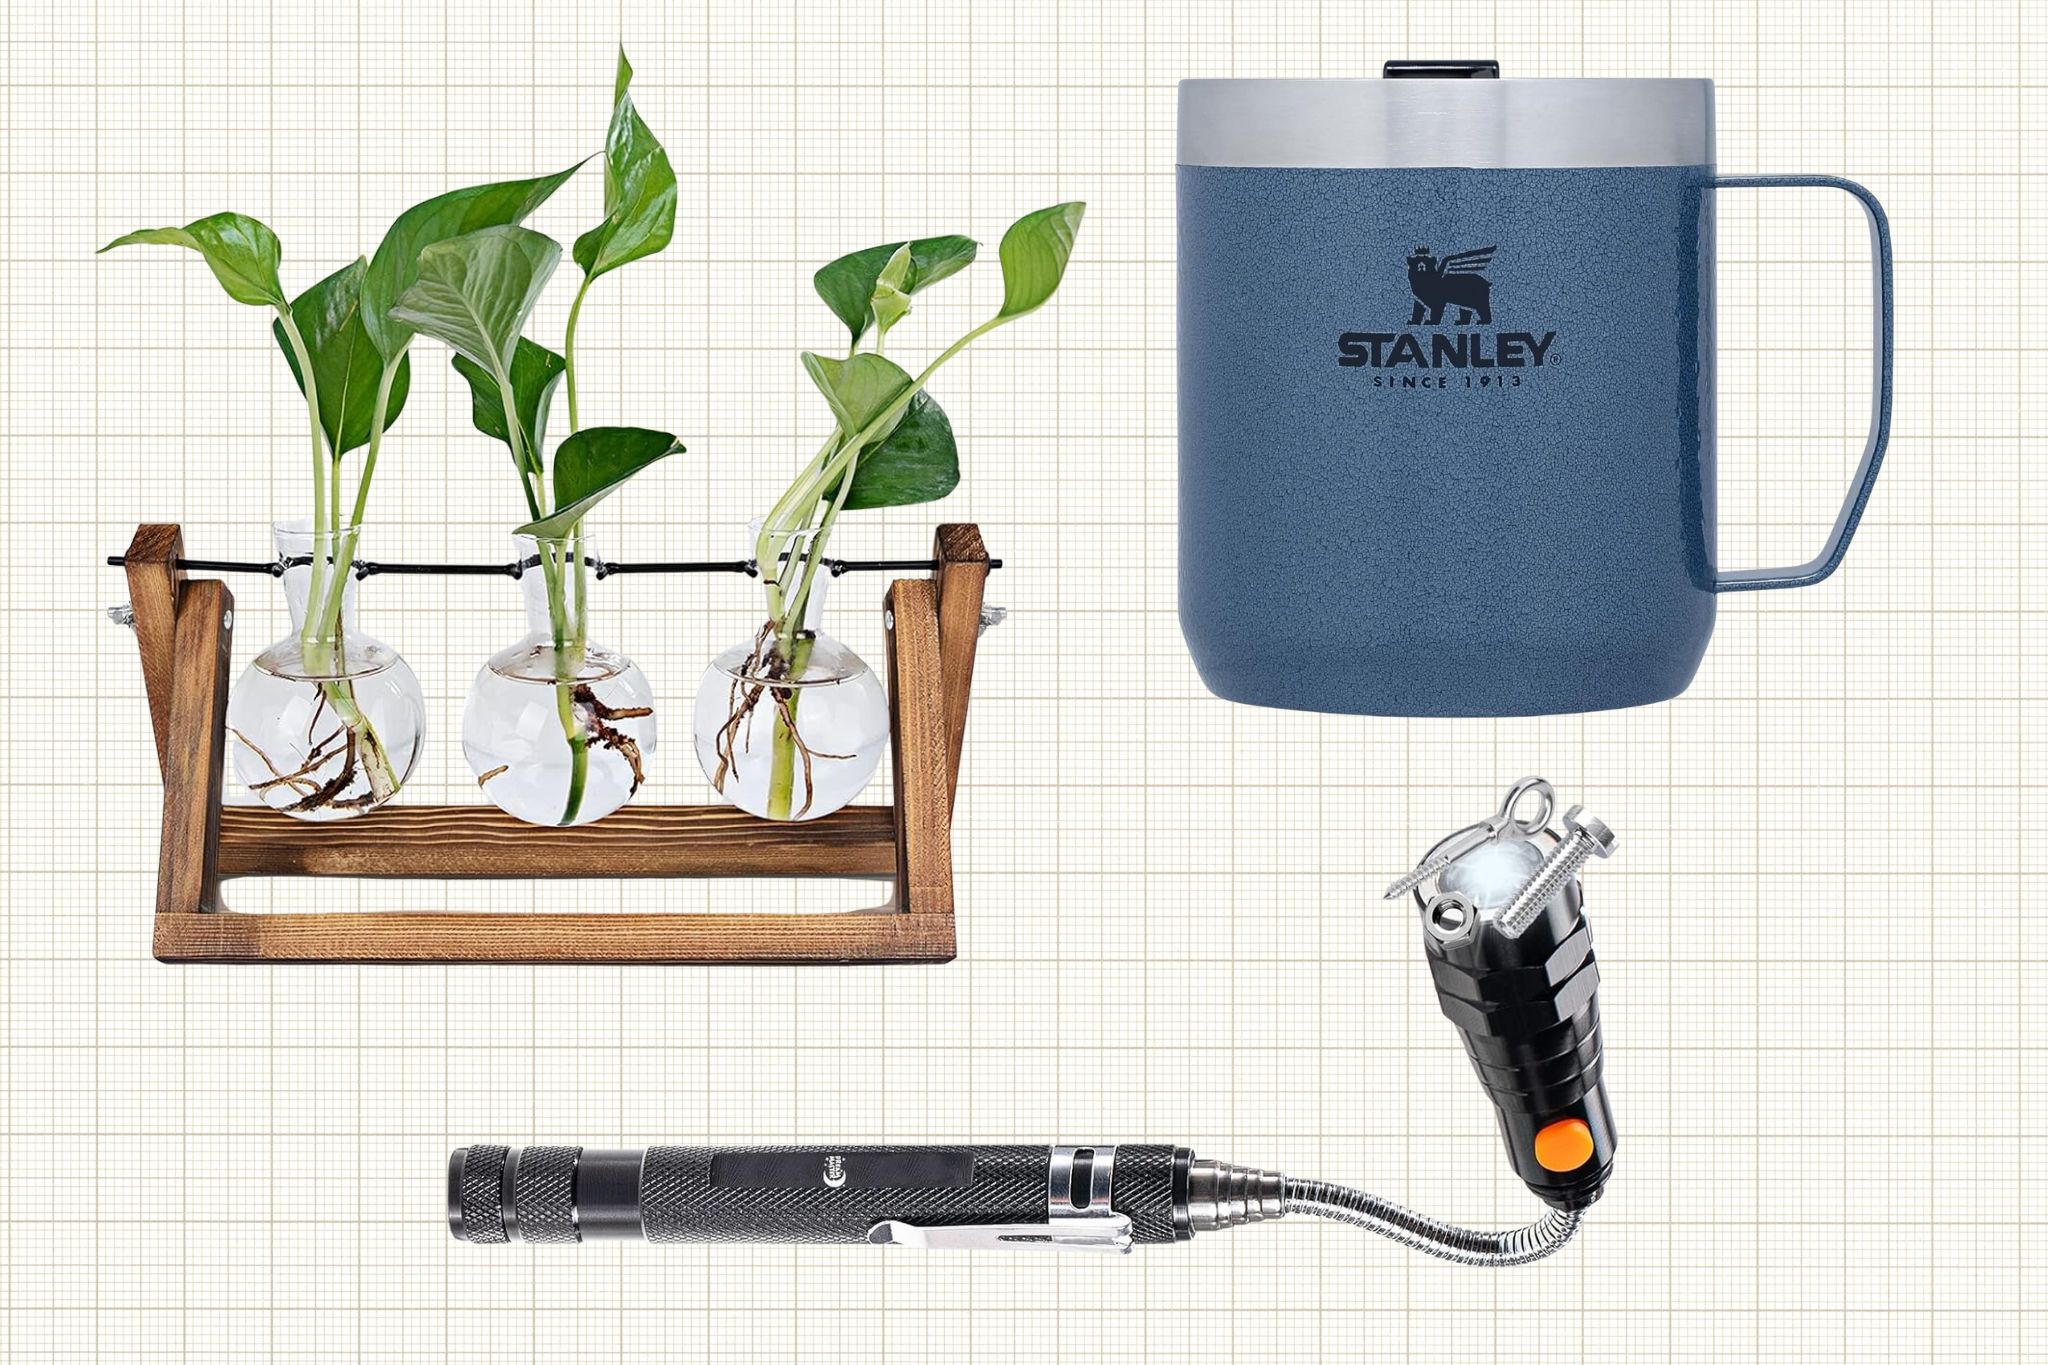 RENMXJ Plant Propagation Station, Stanley Stay Hot Camp Mug, and Dream Master Store Magnetic Pickup Tool isolated on a tan grid paper background